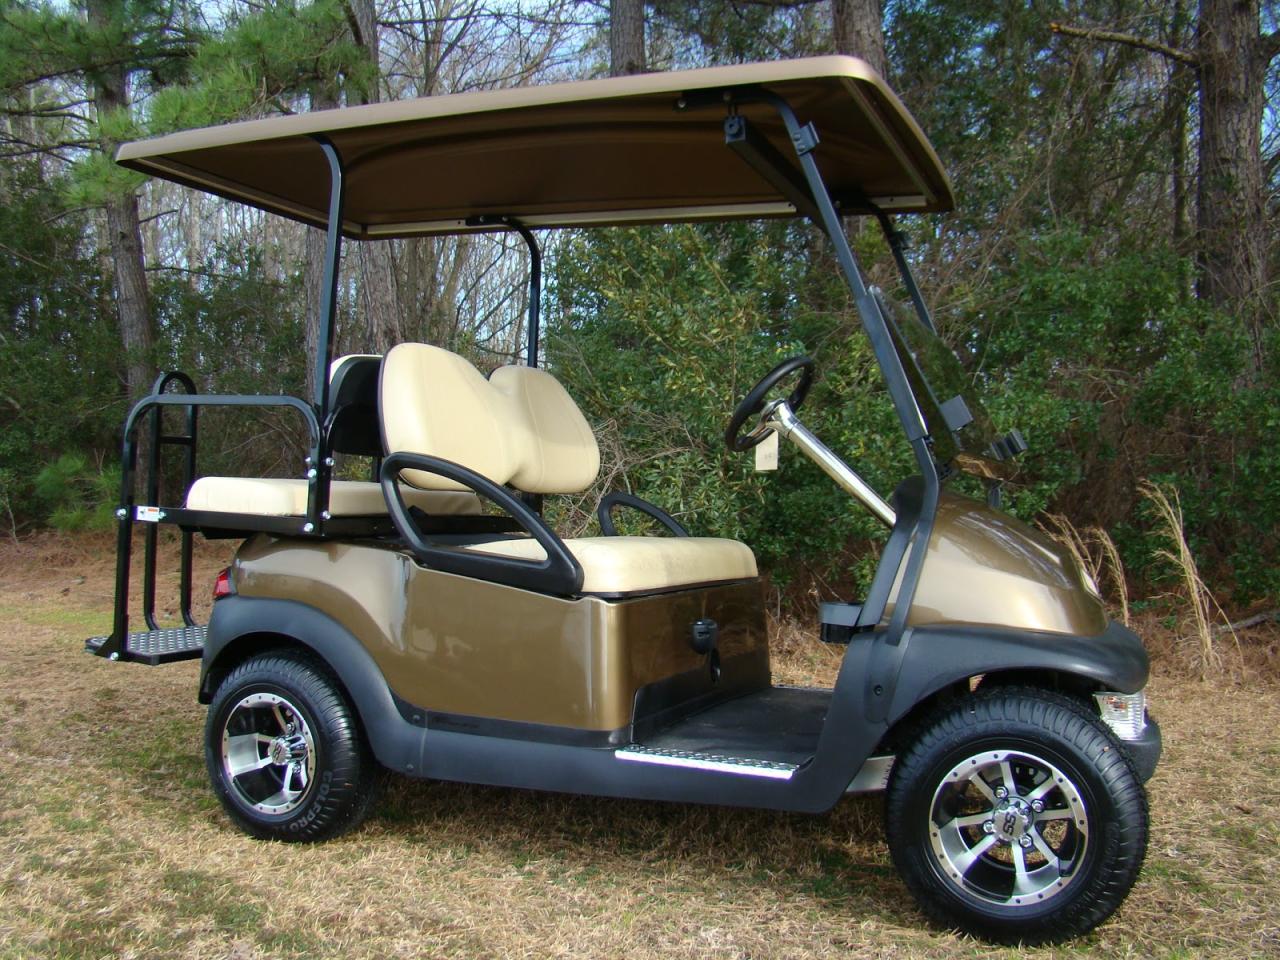 Used Golf Carts for Sale by Owner in Torrance, New Mexico: Find Your Perfect Ride Today!